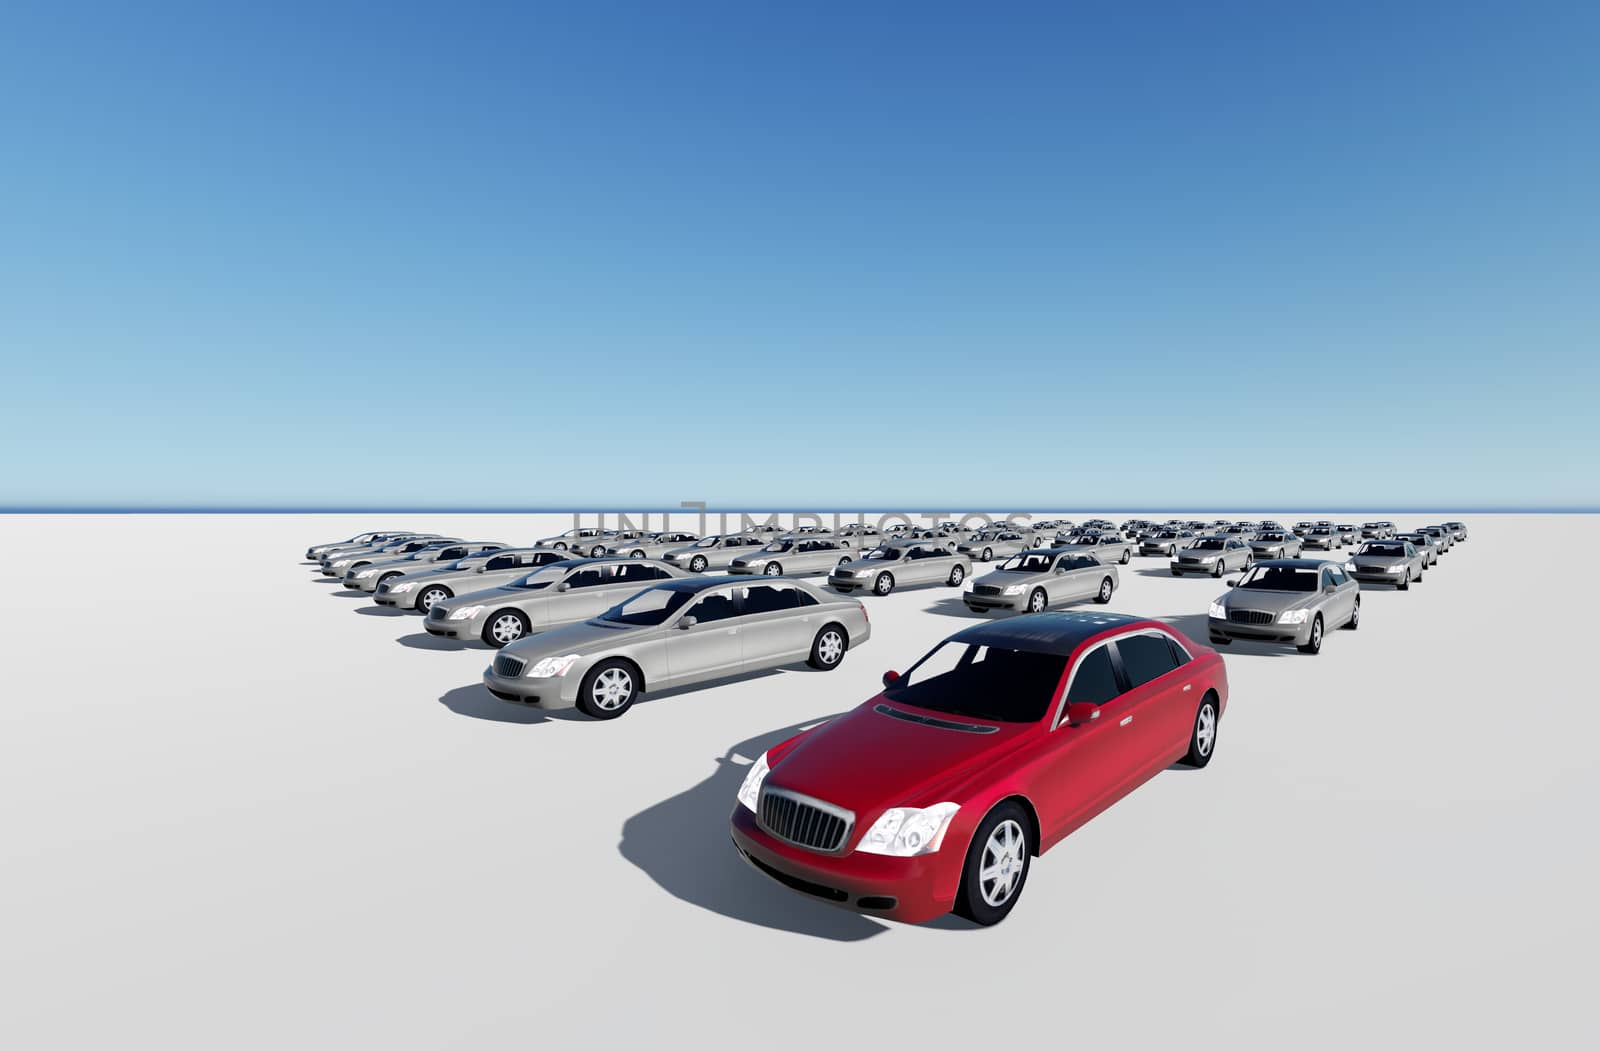 3d illustration of hundreds  cars, one red made in 3d software
